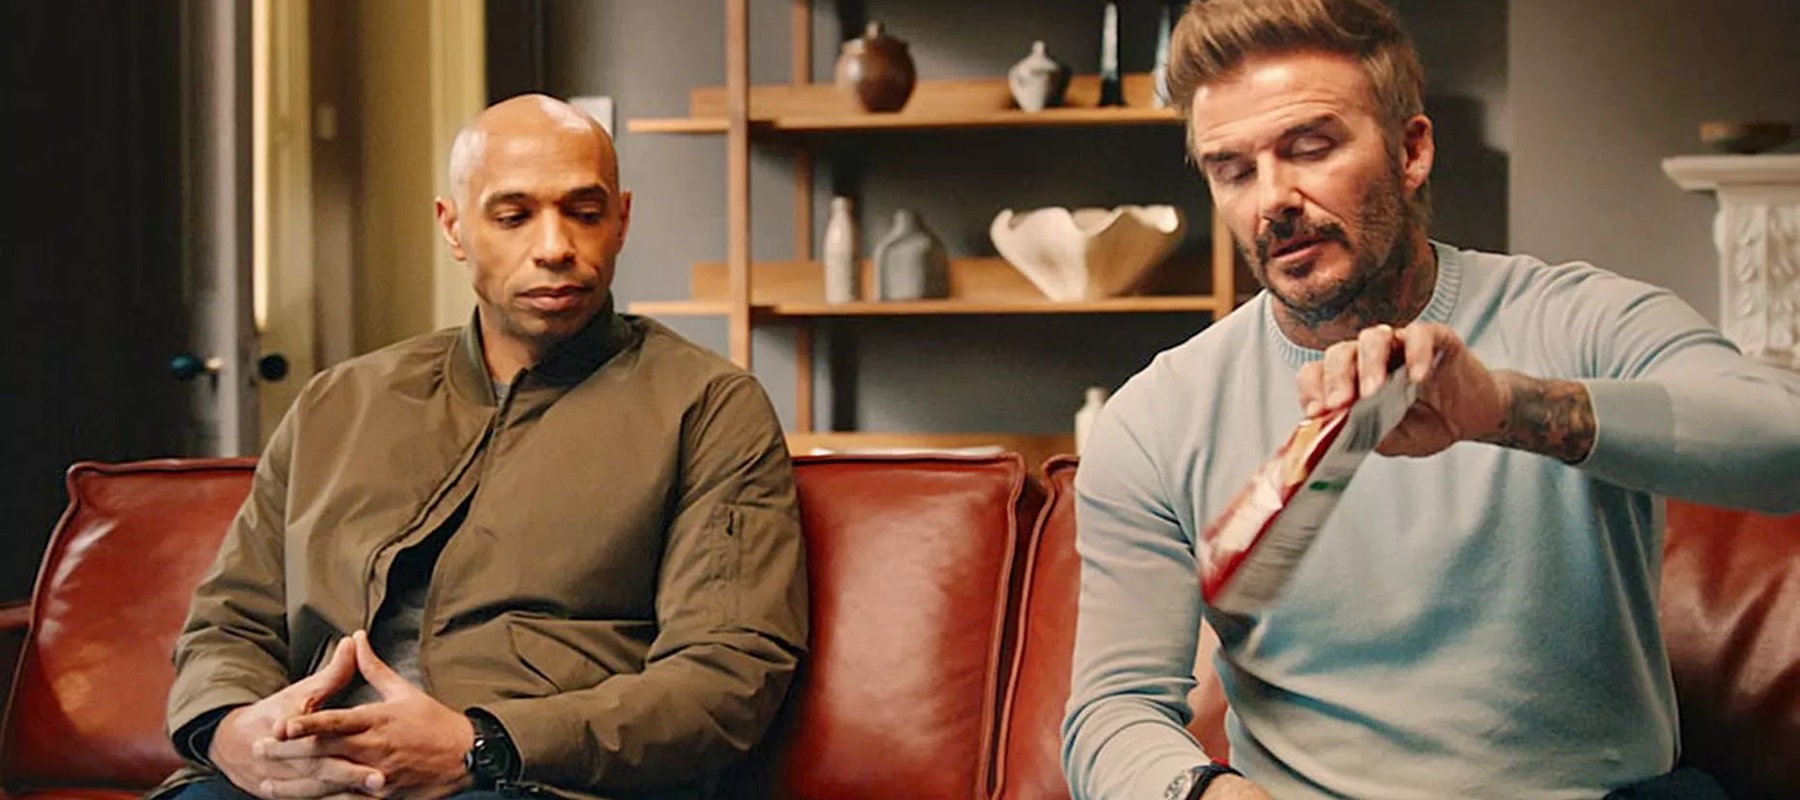 Walkers partners with football stars Thierry Henry and David Beckham in new campaign